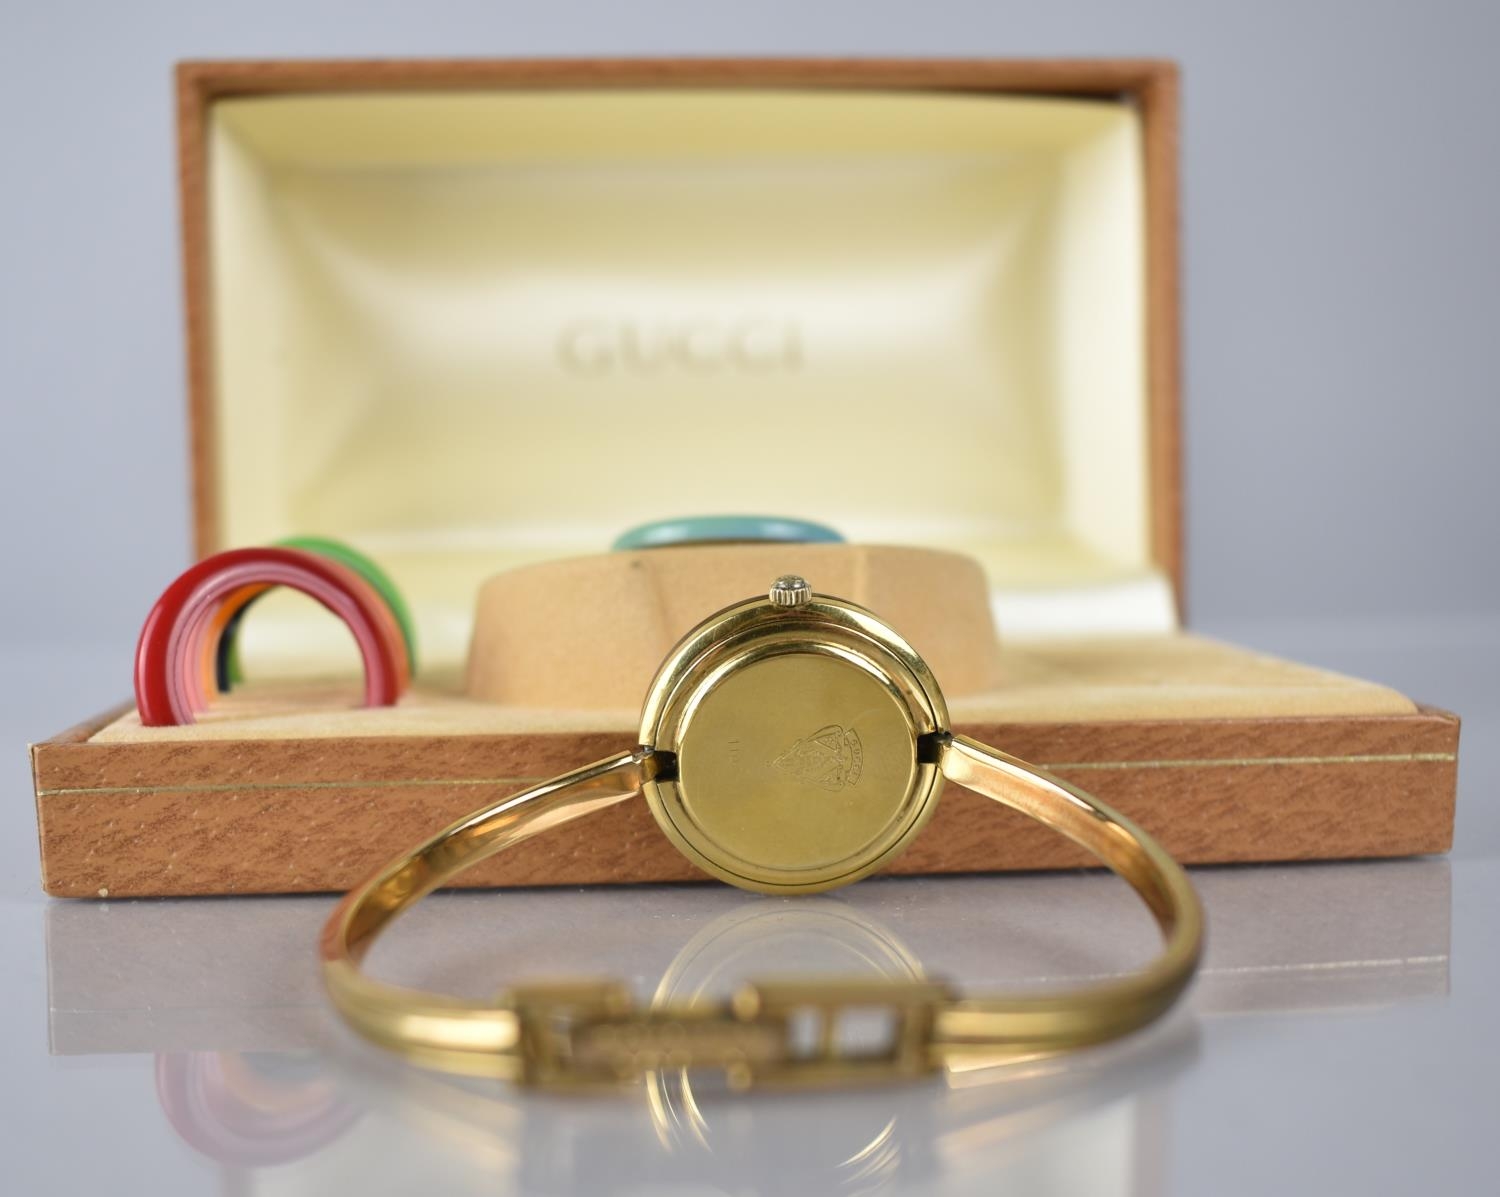 A Boxed Gucci Wrist Watch, White Enamel Dial Inscribed Gucci, Gold Coloured Hands, Interchangeable - Image 2 of 4